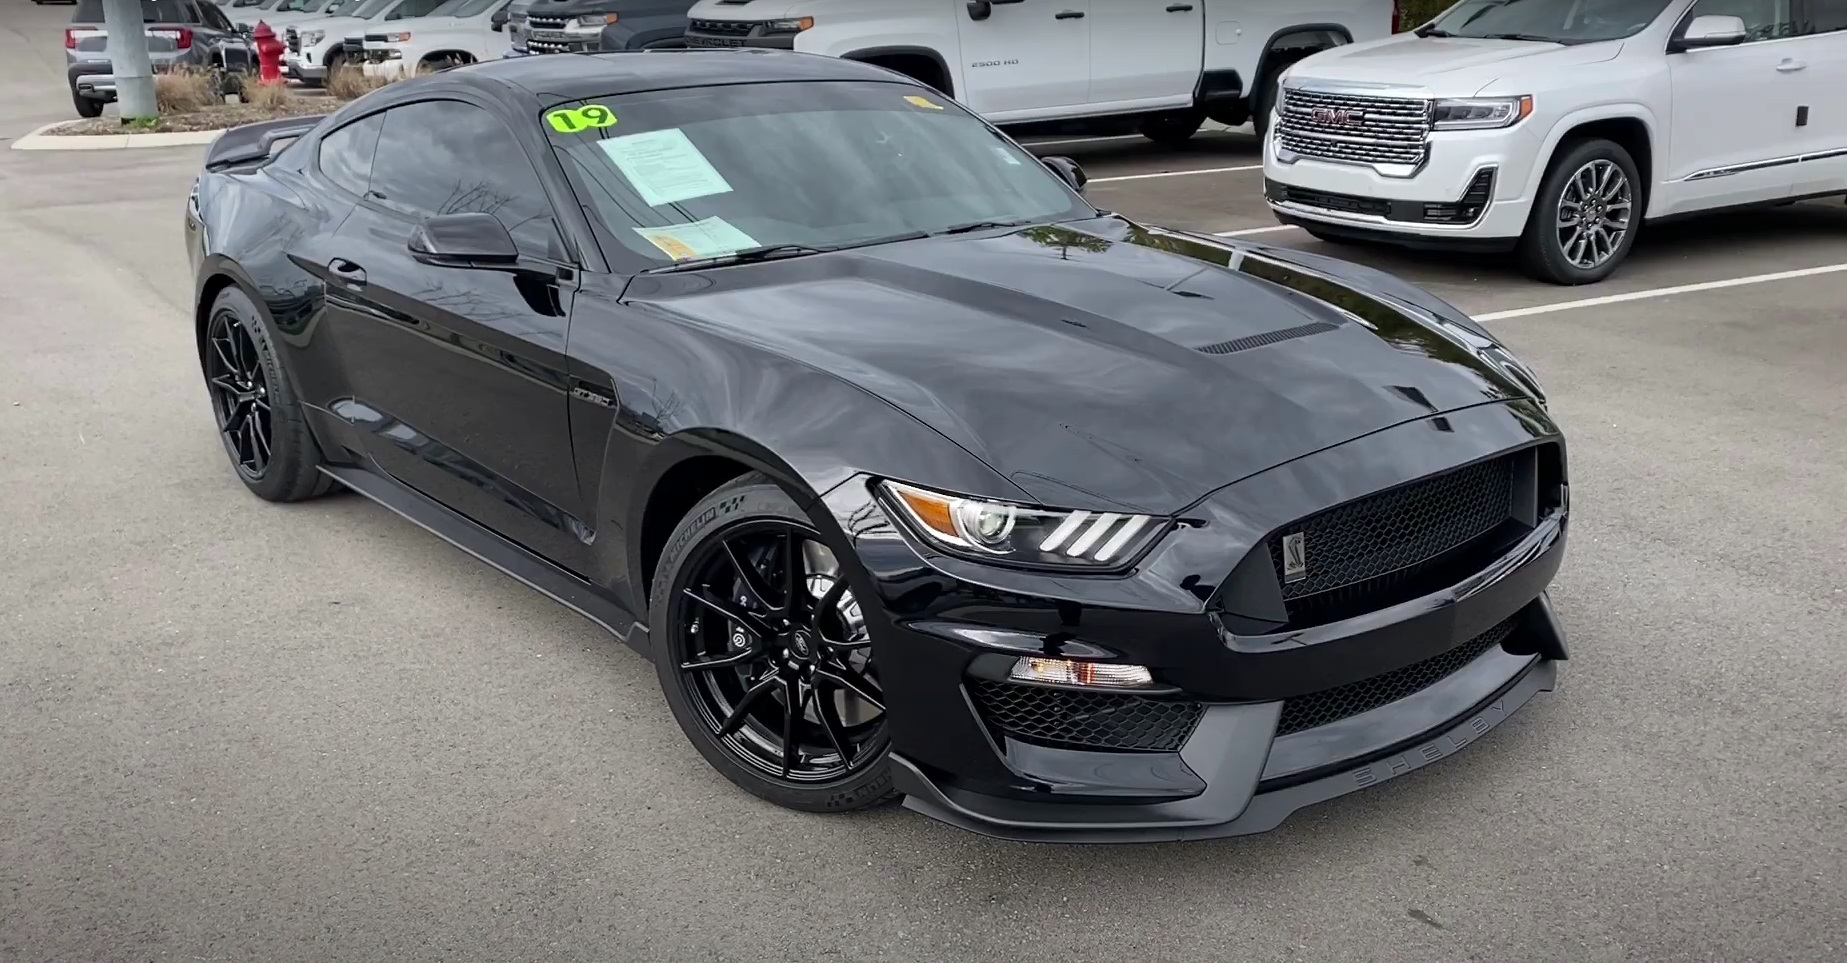 Video: 2019 Ford Mustang Shelby GT350 In-Depth Tour - Mustang Specs